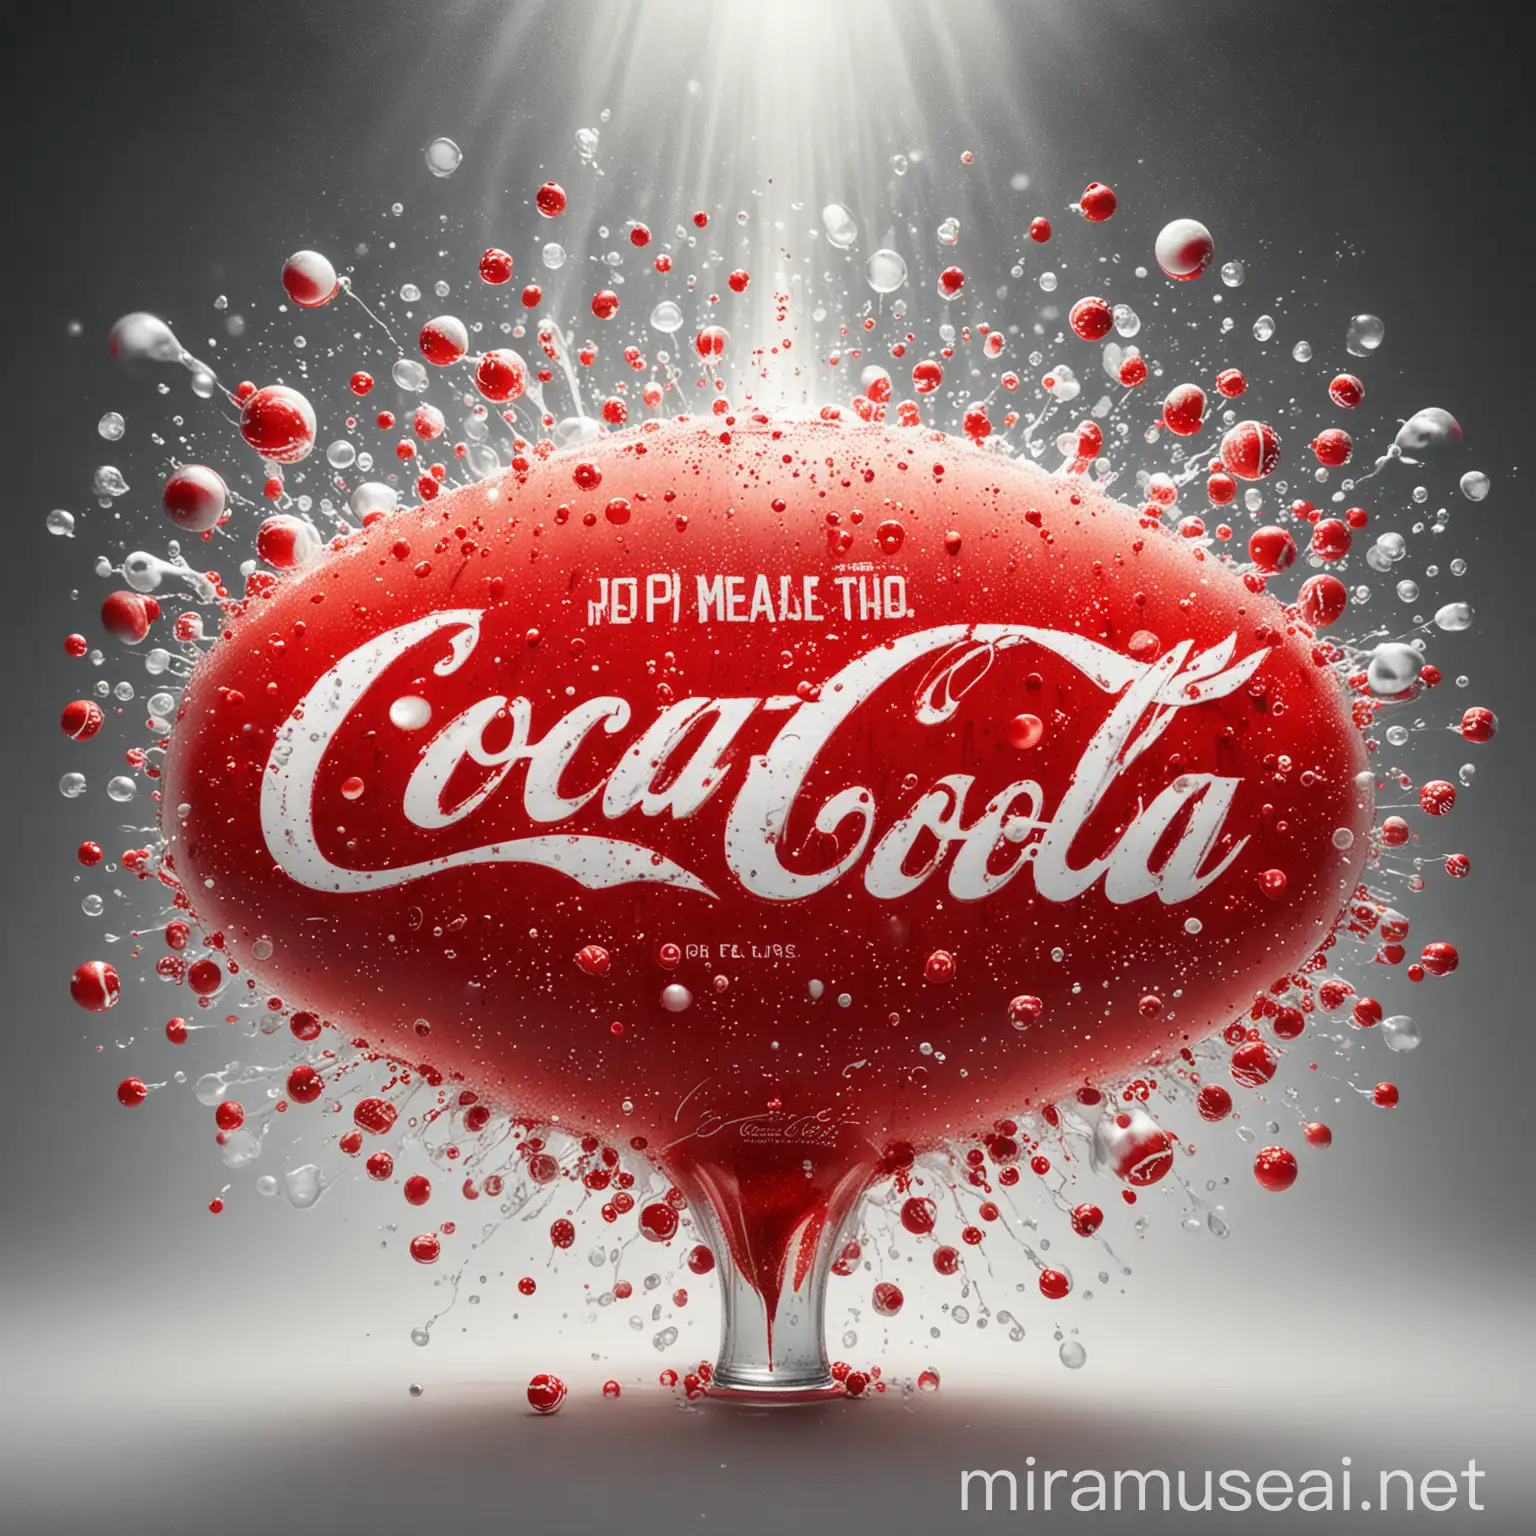 a vibrant and bright image inspired by the Coca-Cola company. Imagine a dynamic composition featuring the iconic red and white color scheme, with the classic Coca-Cola script logo taking center stage. Surrounding the logo, effervescent bubbles rise, capturing the refreshing essence of the beverage. The background could be a radiant burst of light that symbolizes the brand’s bright and positive energy.